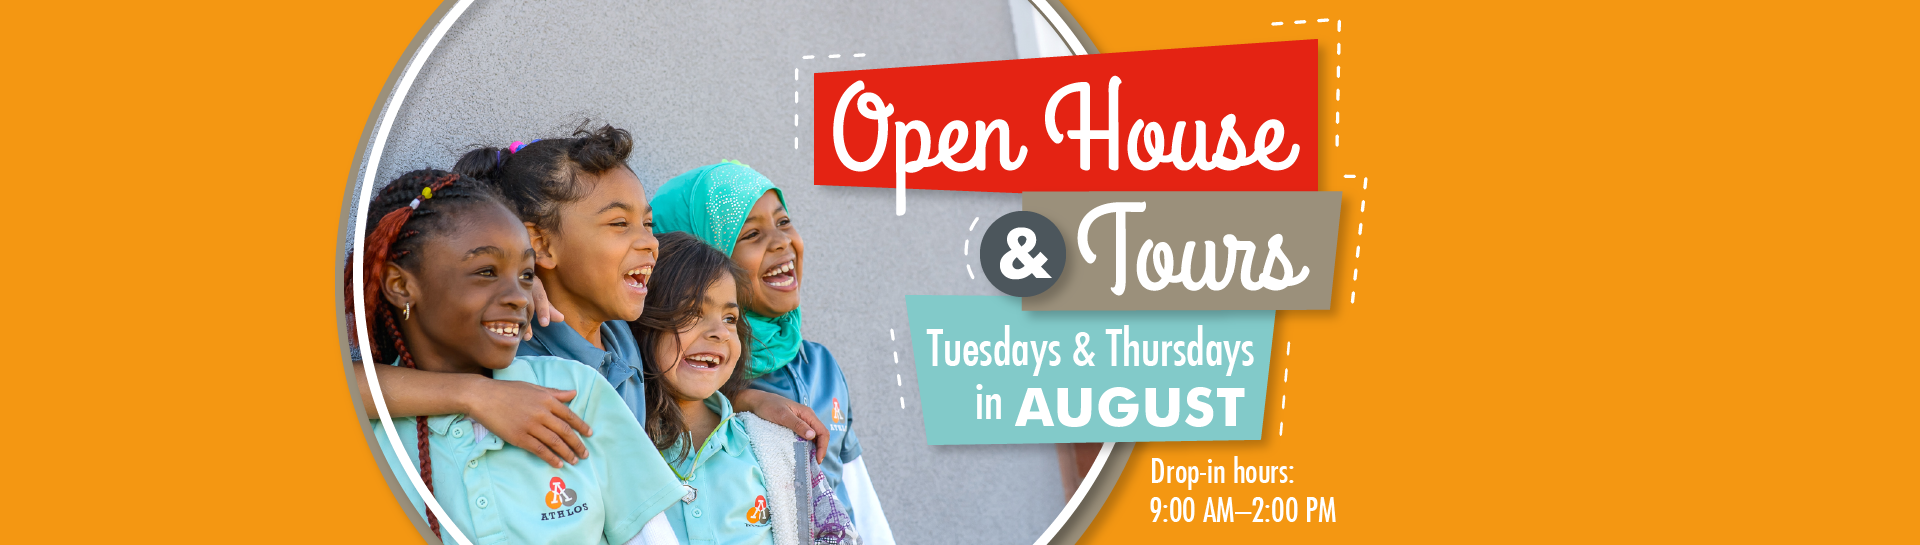 Open House & Tours - August